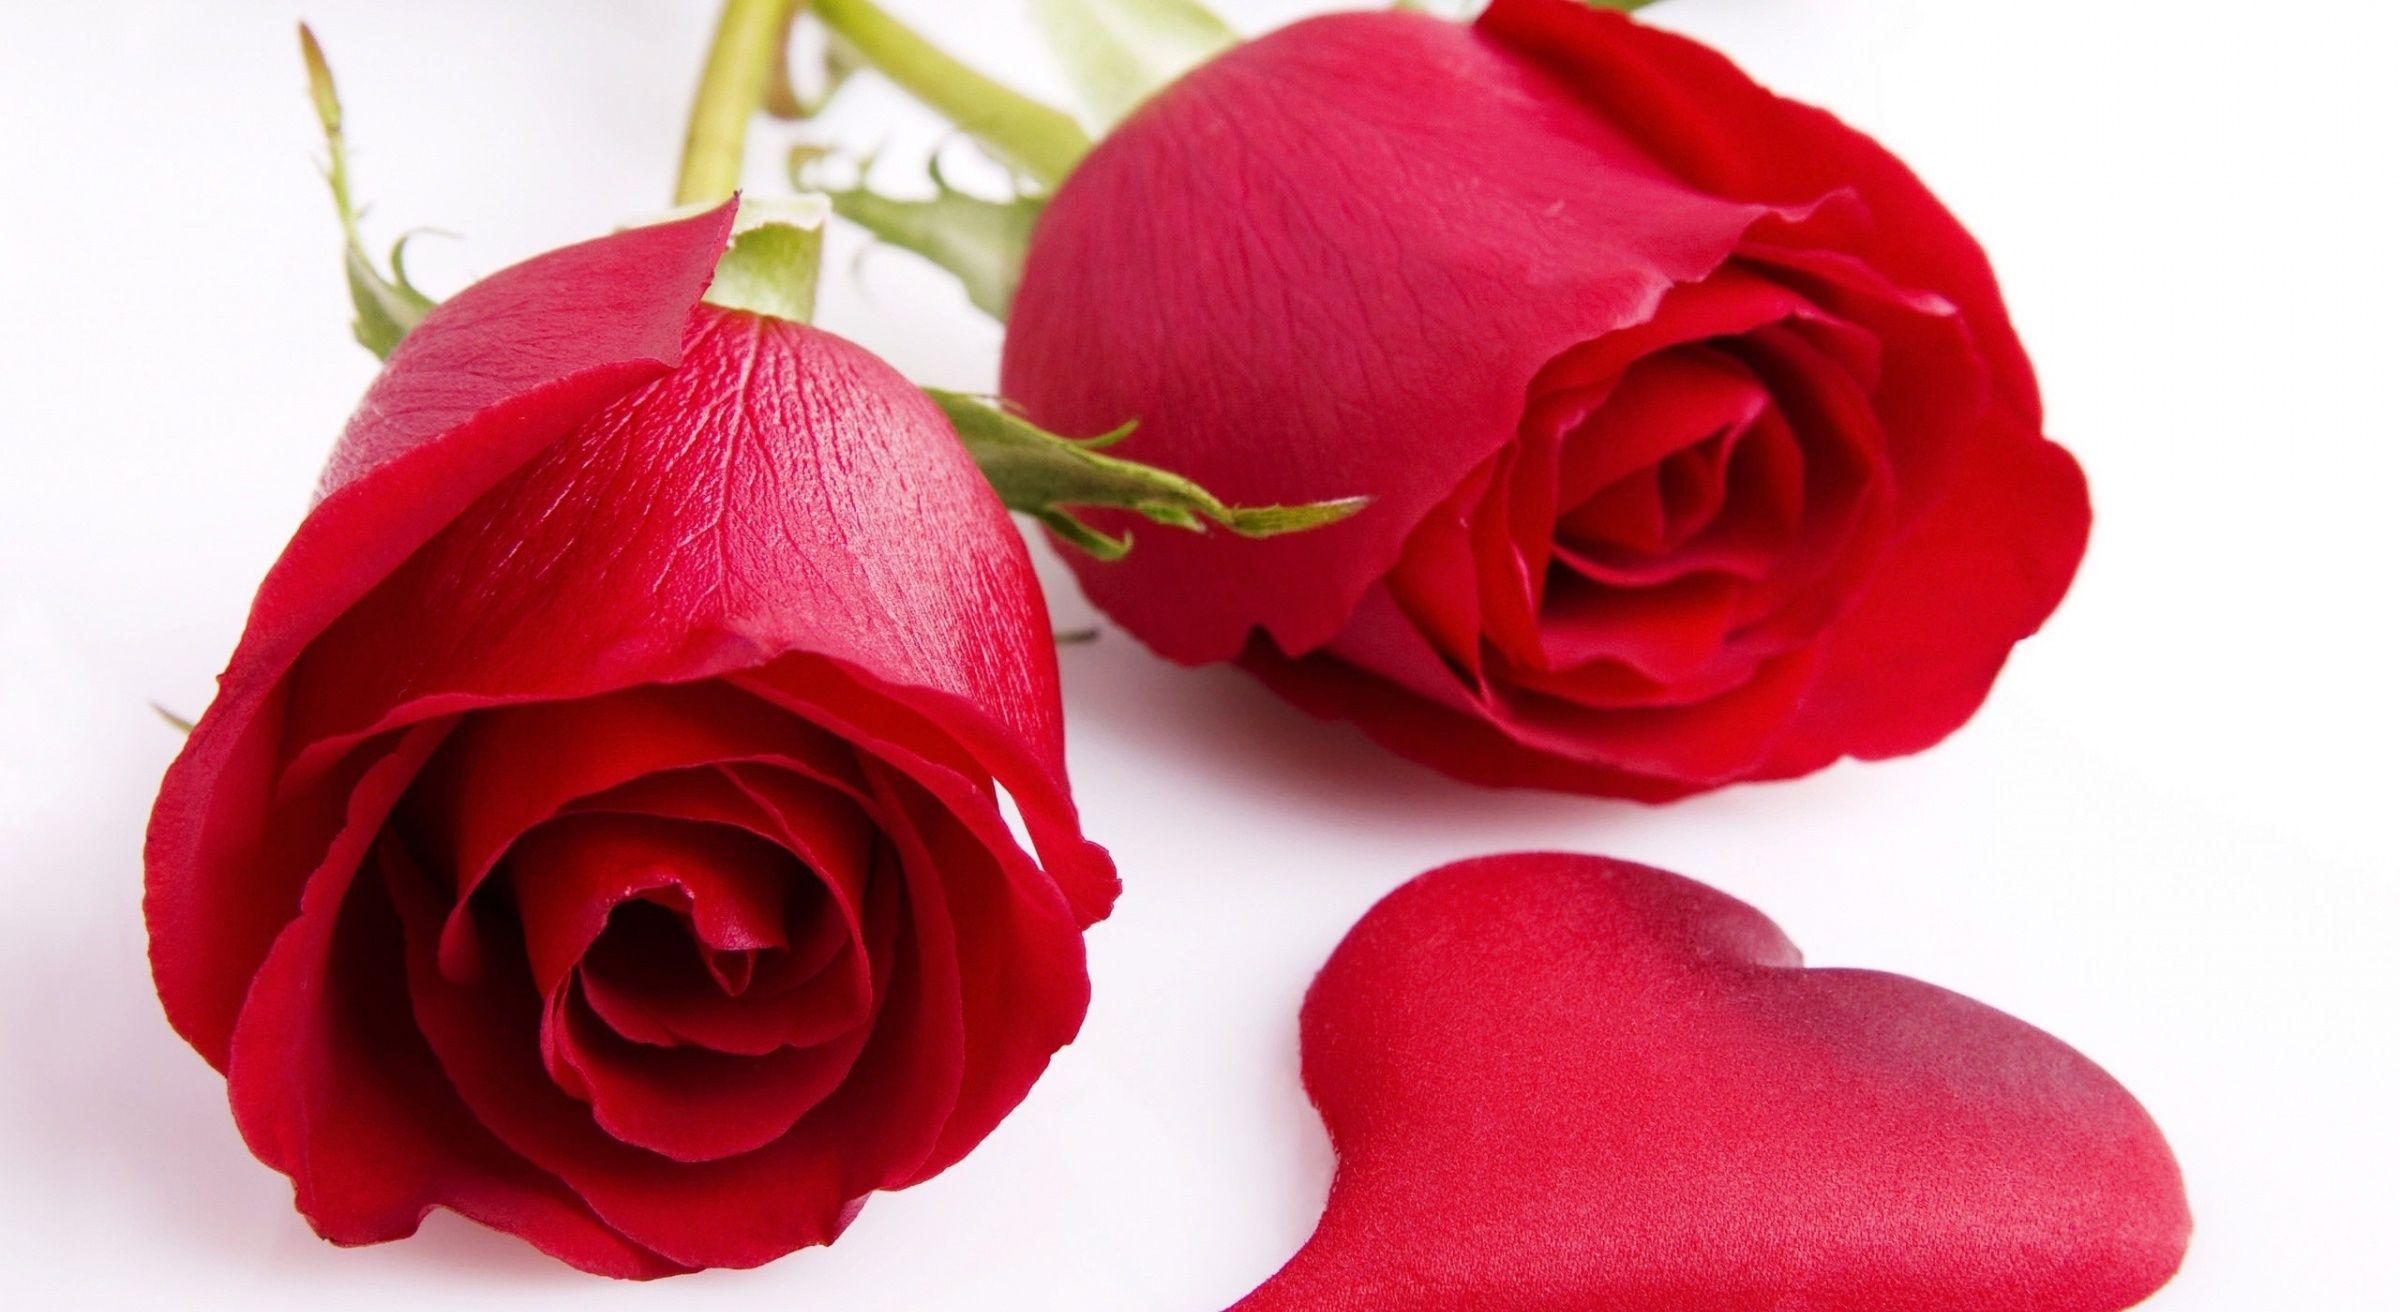 Red Rose Live Wallpaper Android Apps on Google Play